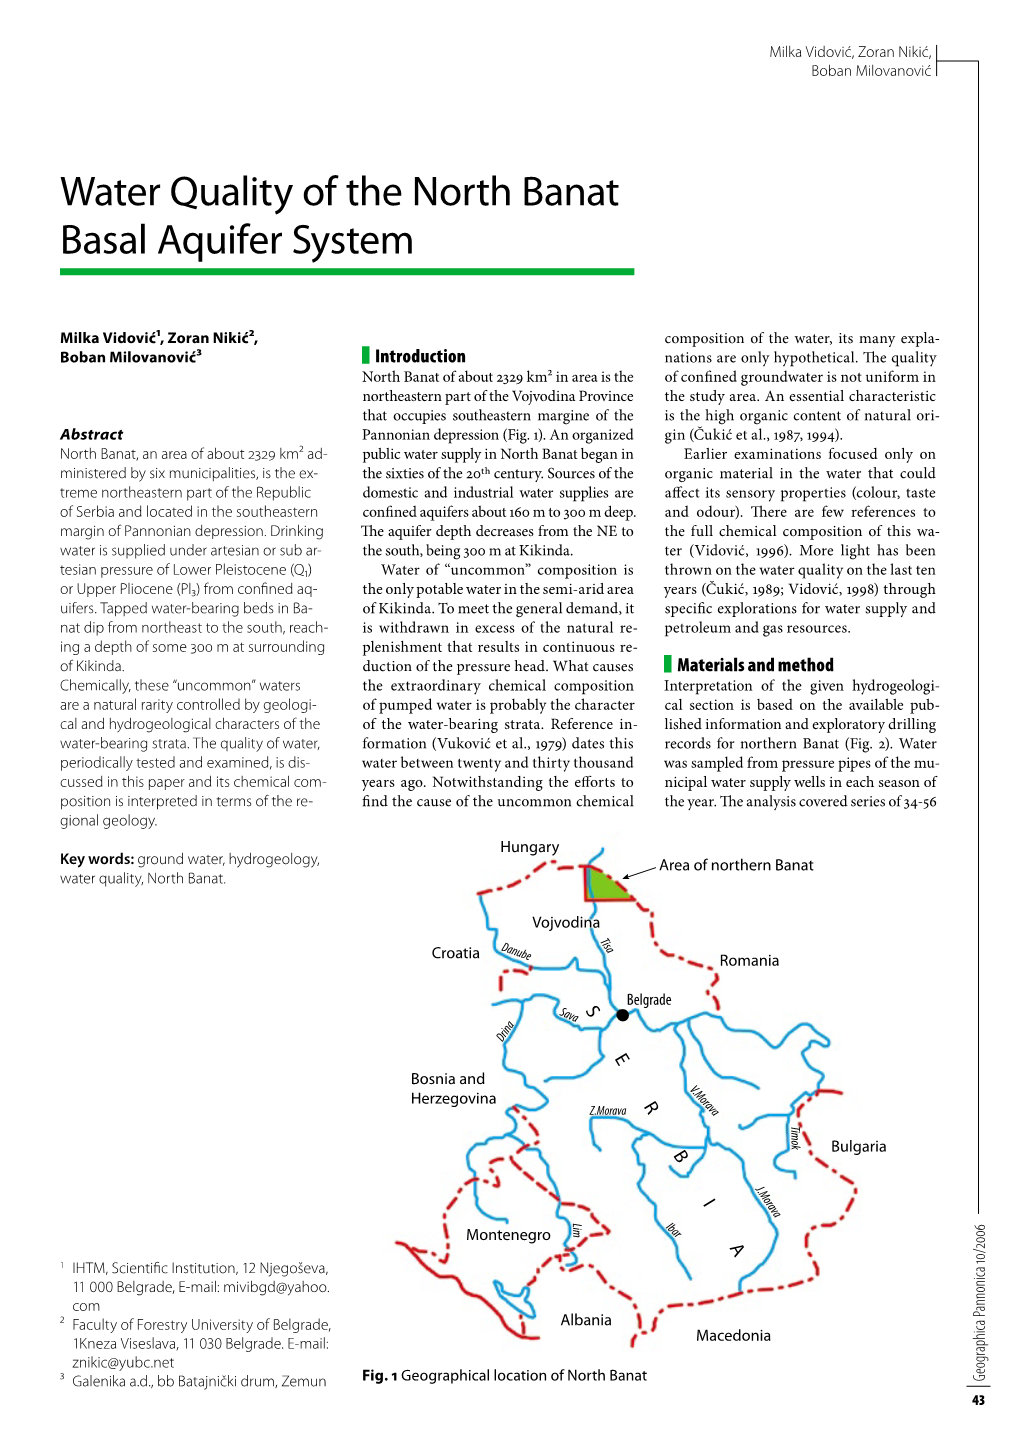 Water Quality of the North Banat Basal Aquifer System